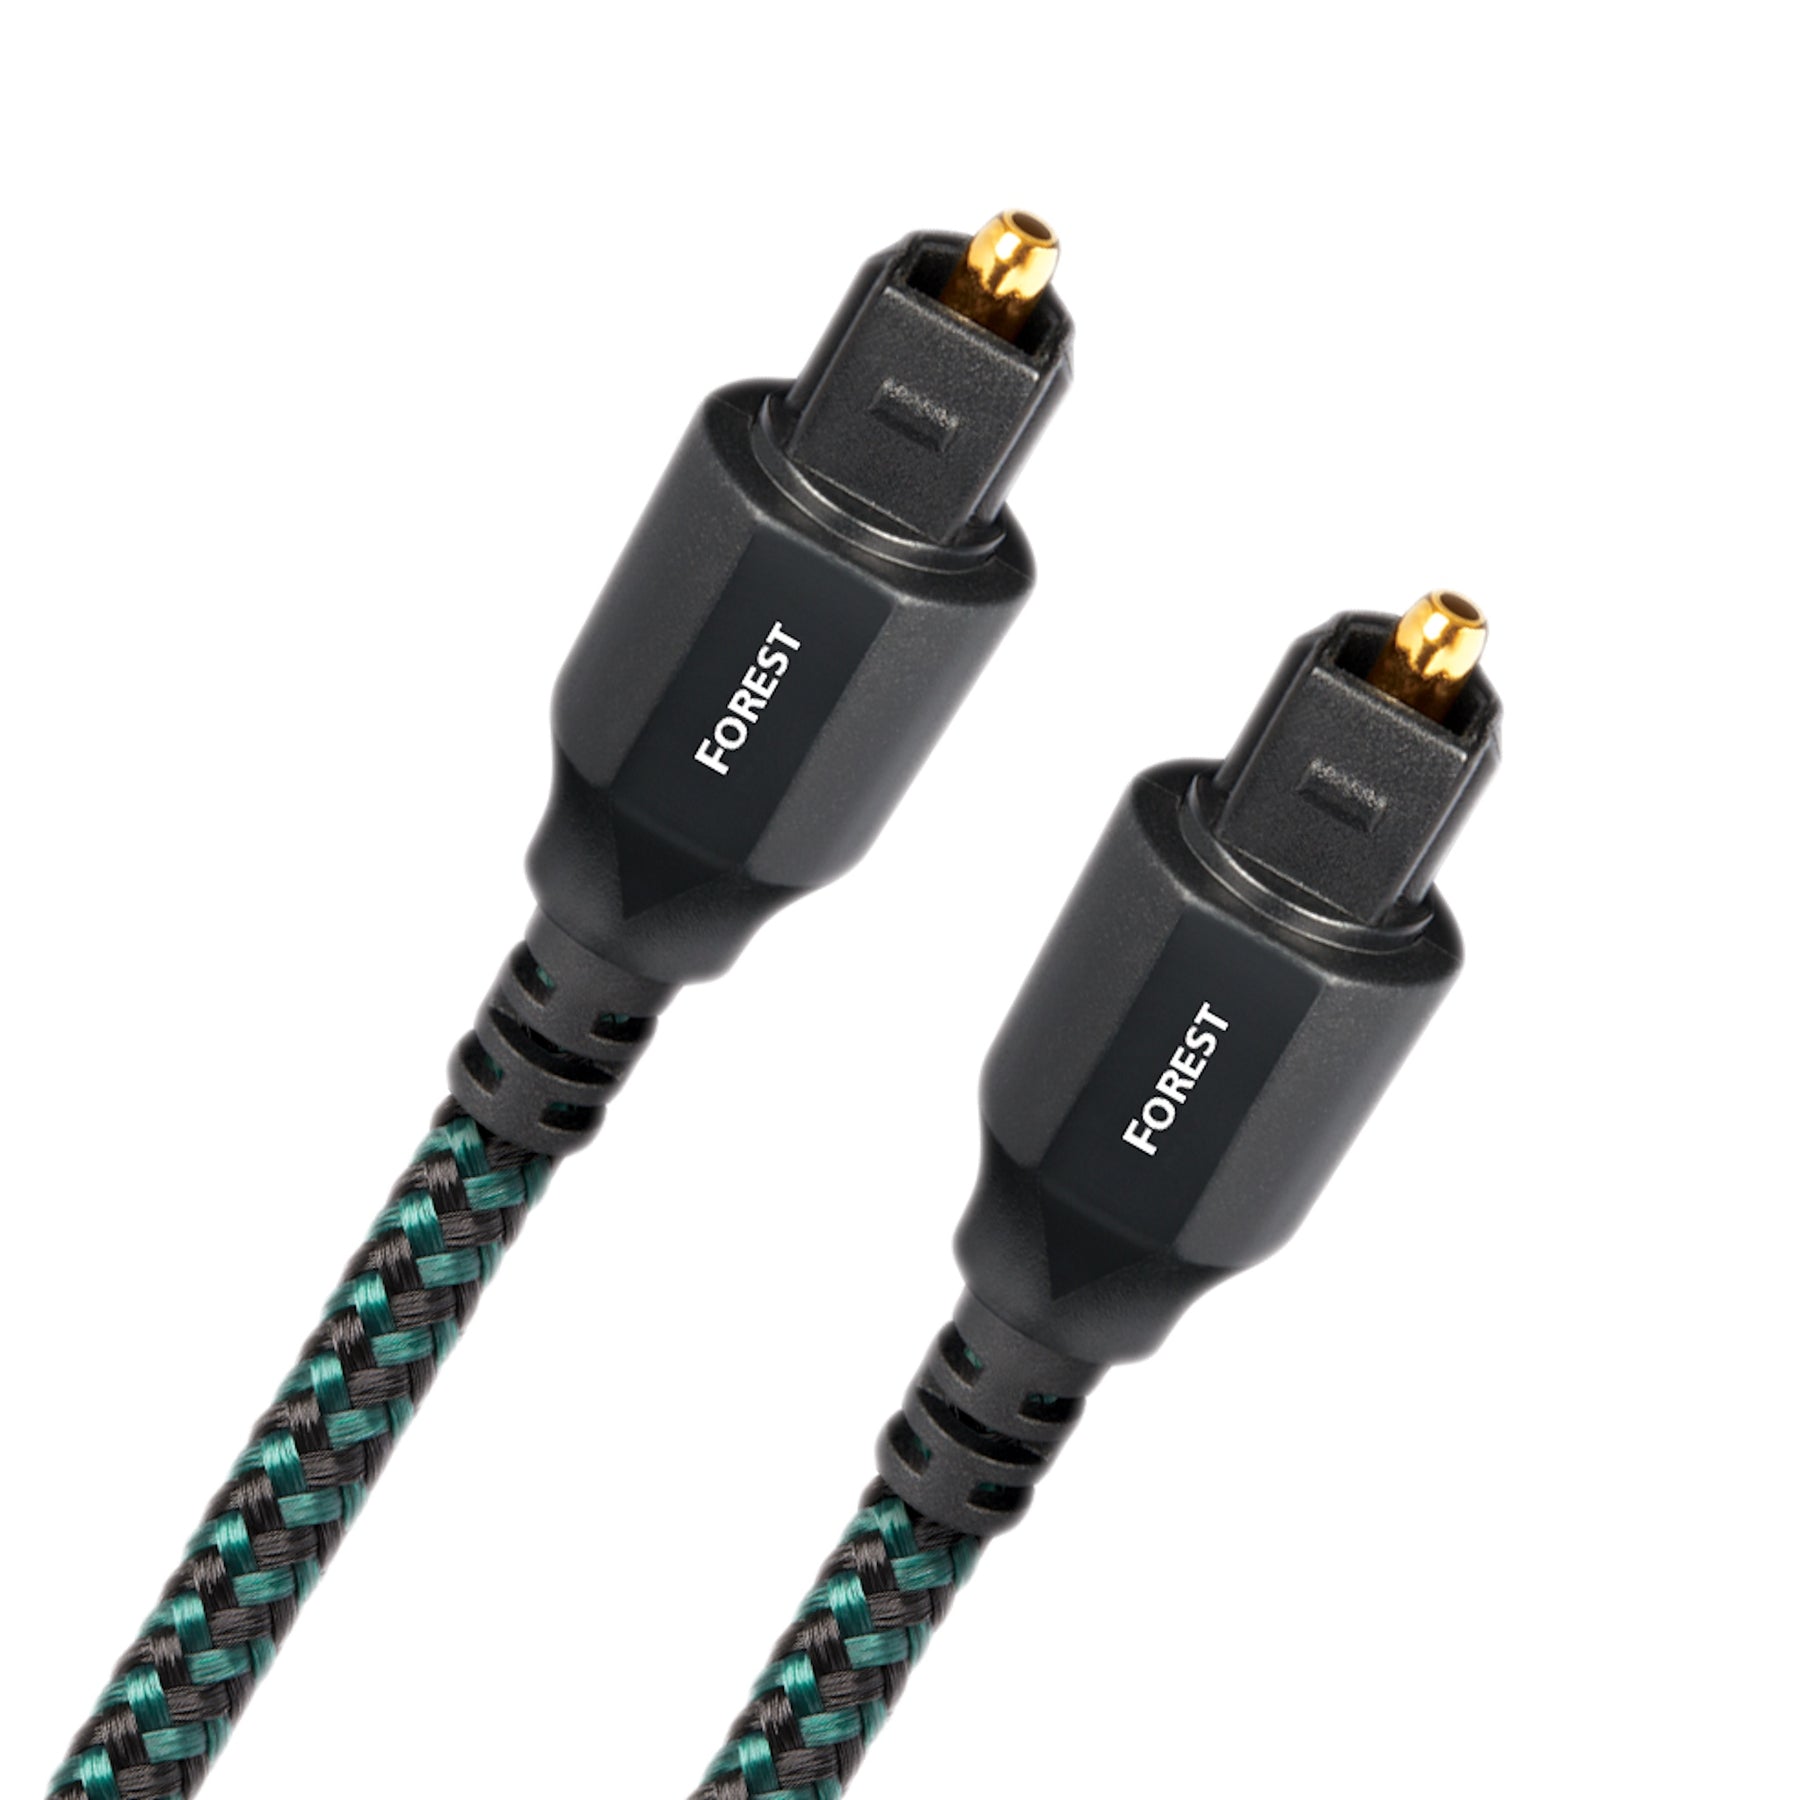 AudioQuest Optical TOSLINK Interconnect Cable | Bloom Audio